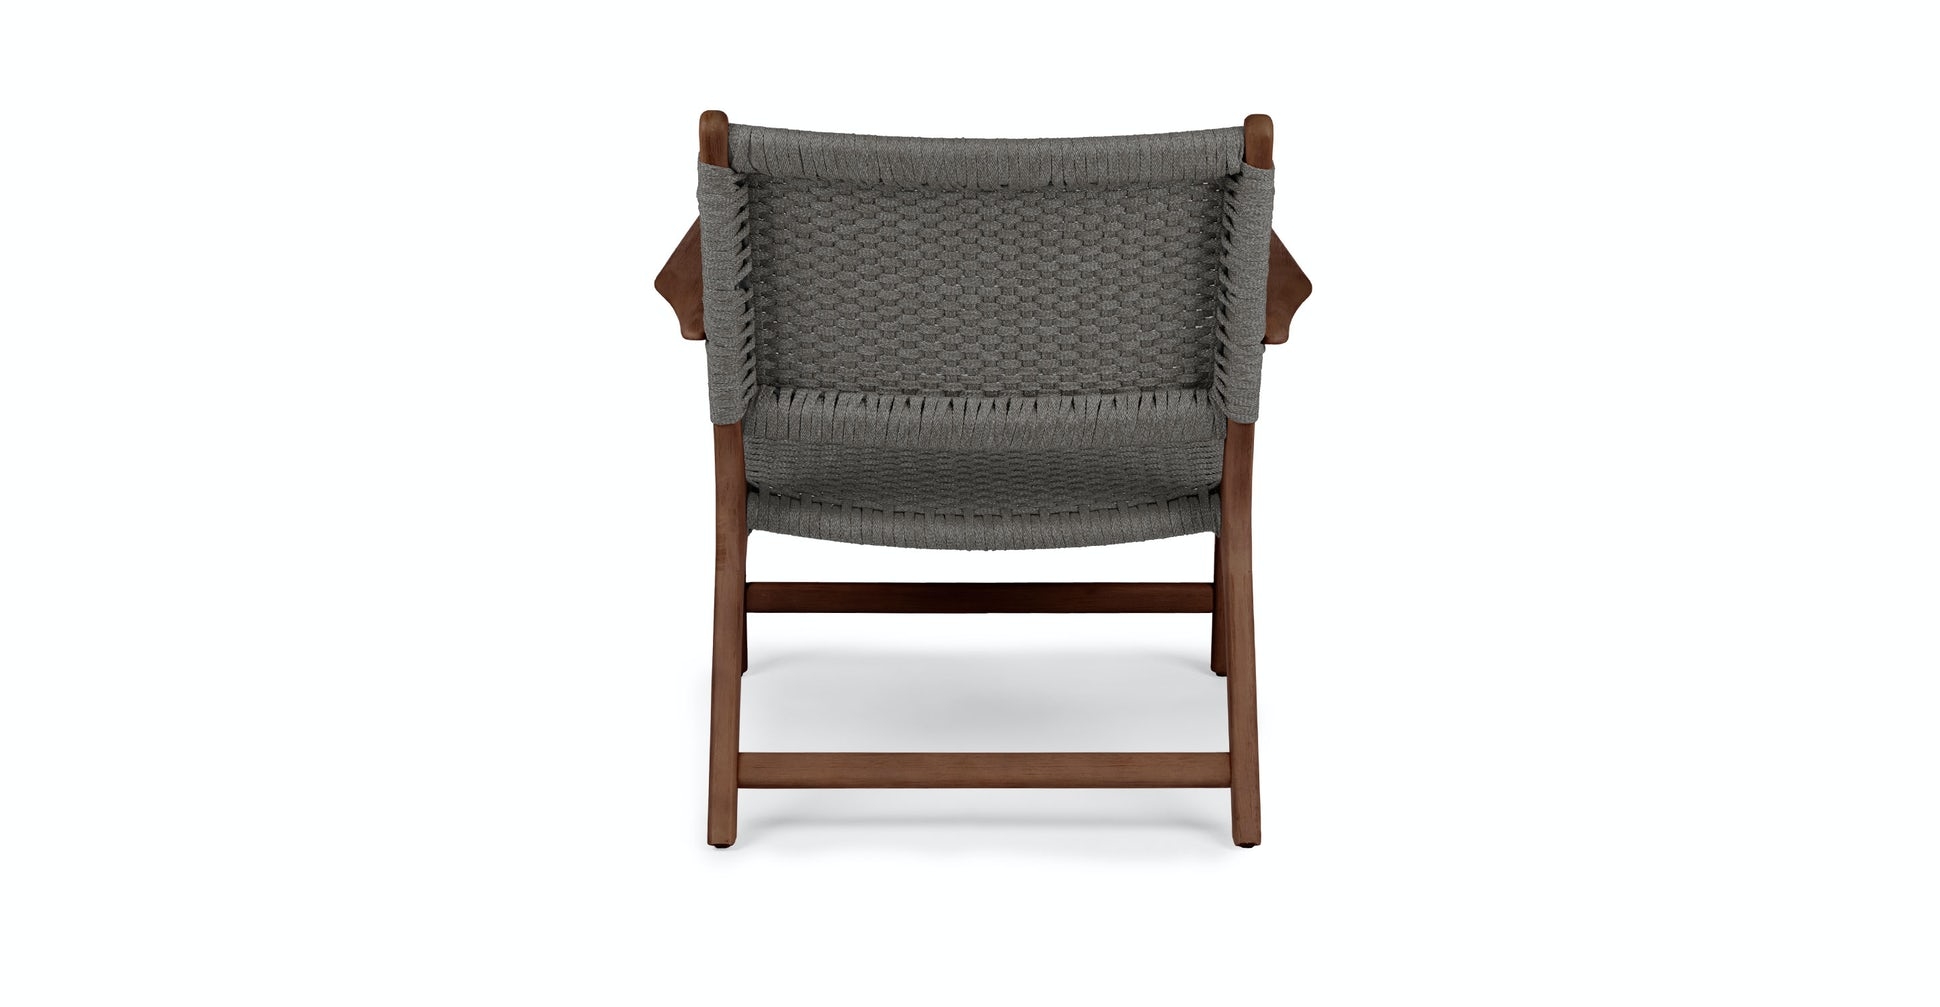 Reni Freckle Gray Lounge Chair - Image 3